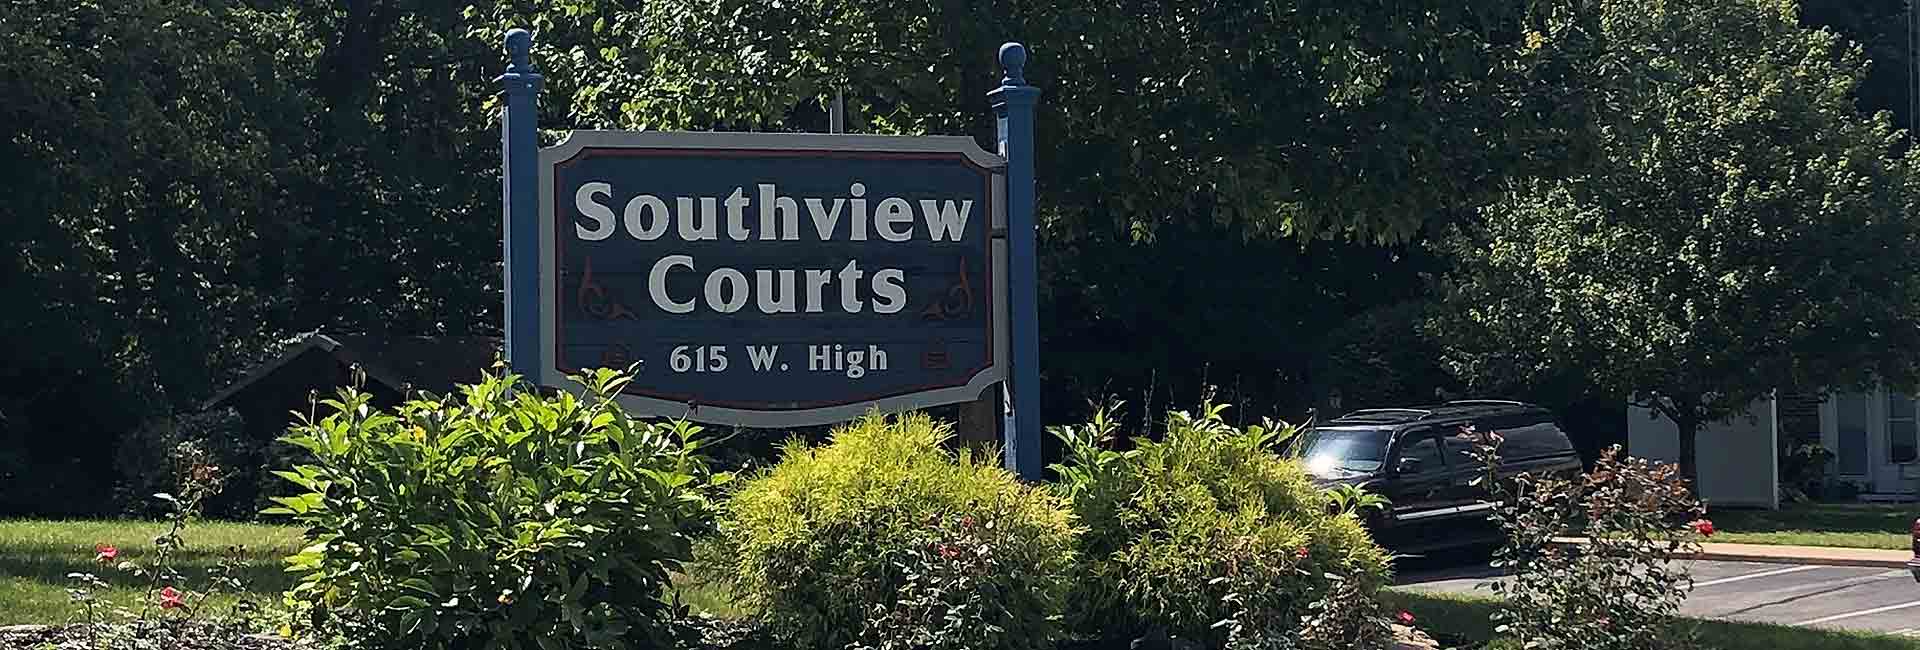 Southview Courts sign